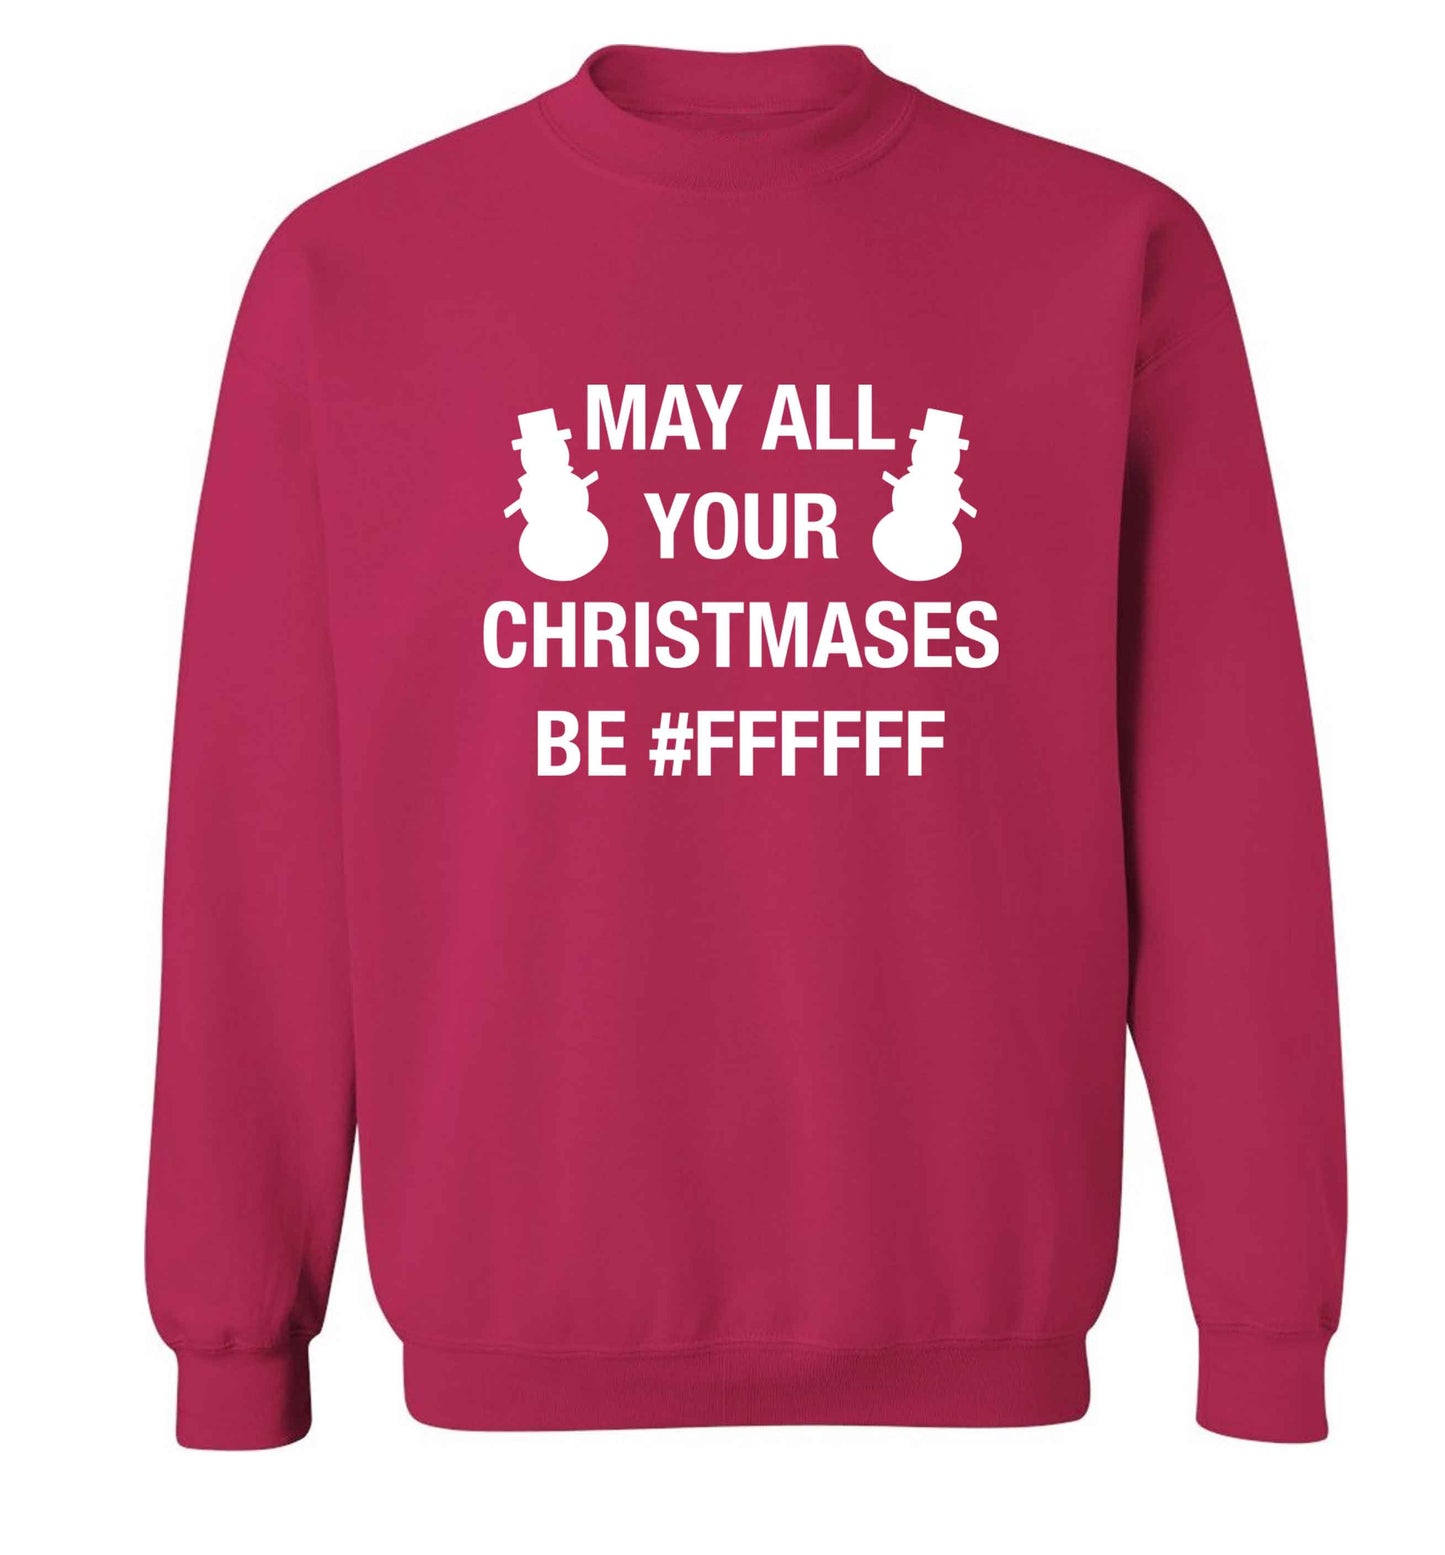 May all your Christmases be #FFFFFF adult's unisex pink sweater 2XL